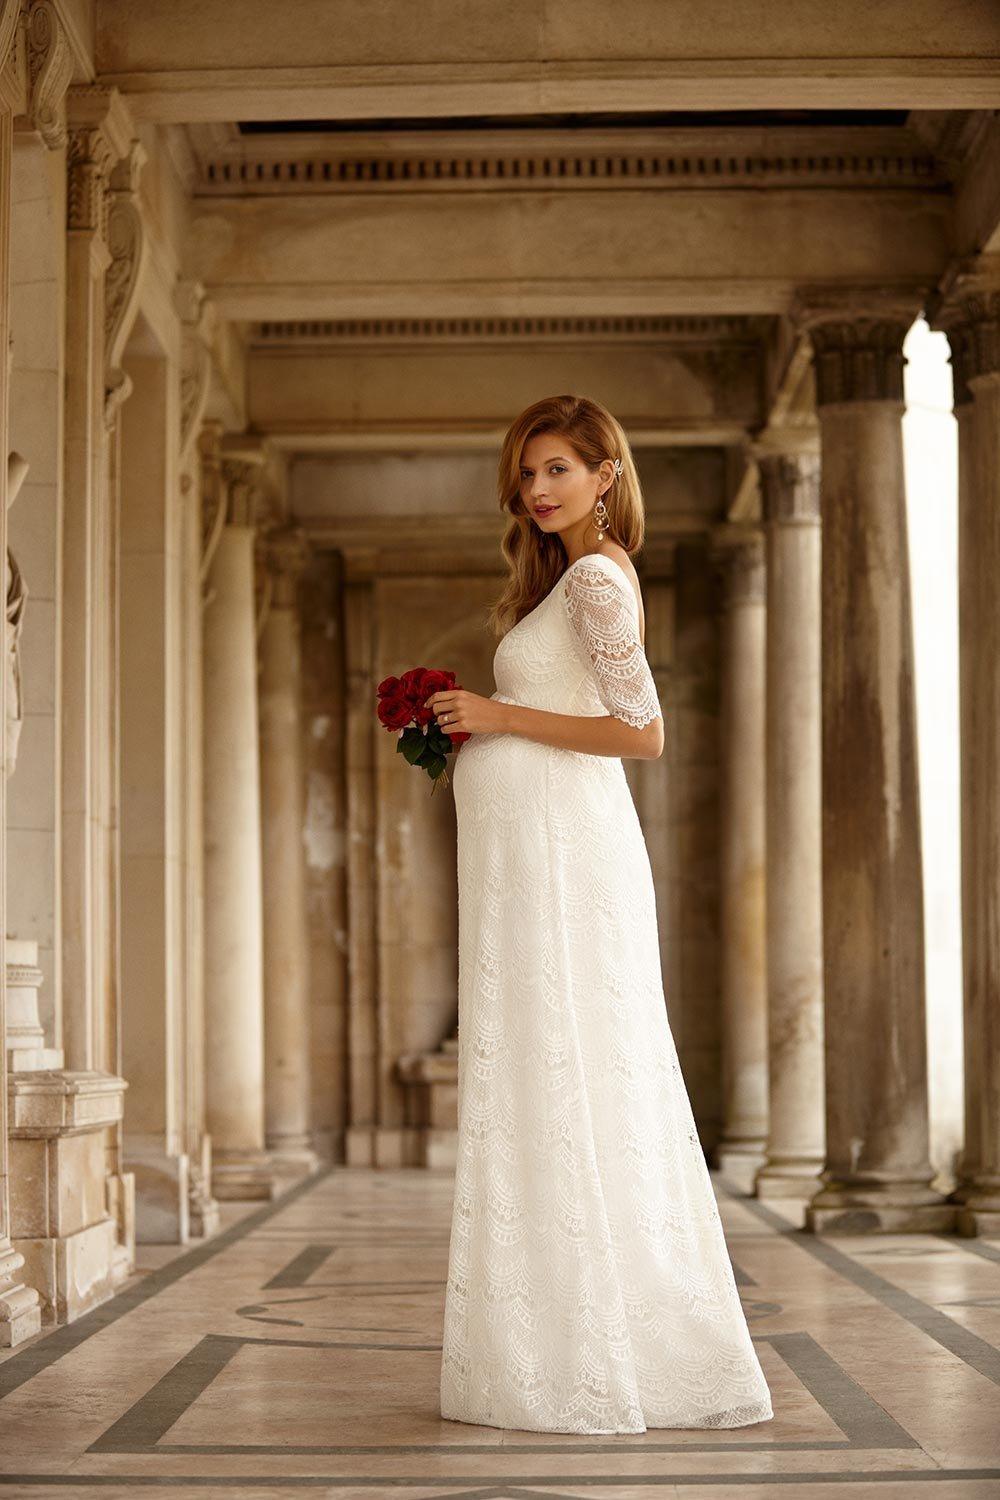 31 Maternity Wedding Dresses: Stunning Picks for Pregnant Brides -  hitched.co.uk - hitched.co.uk